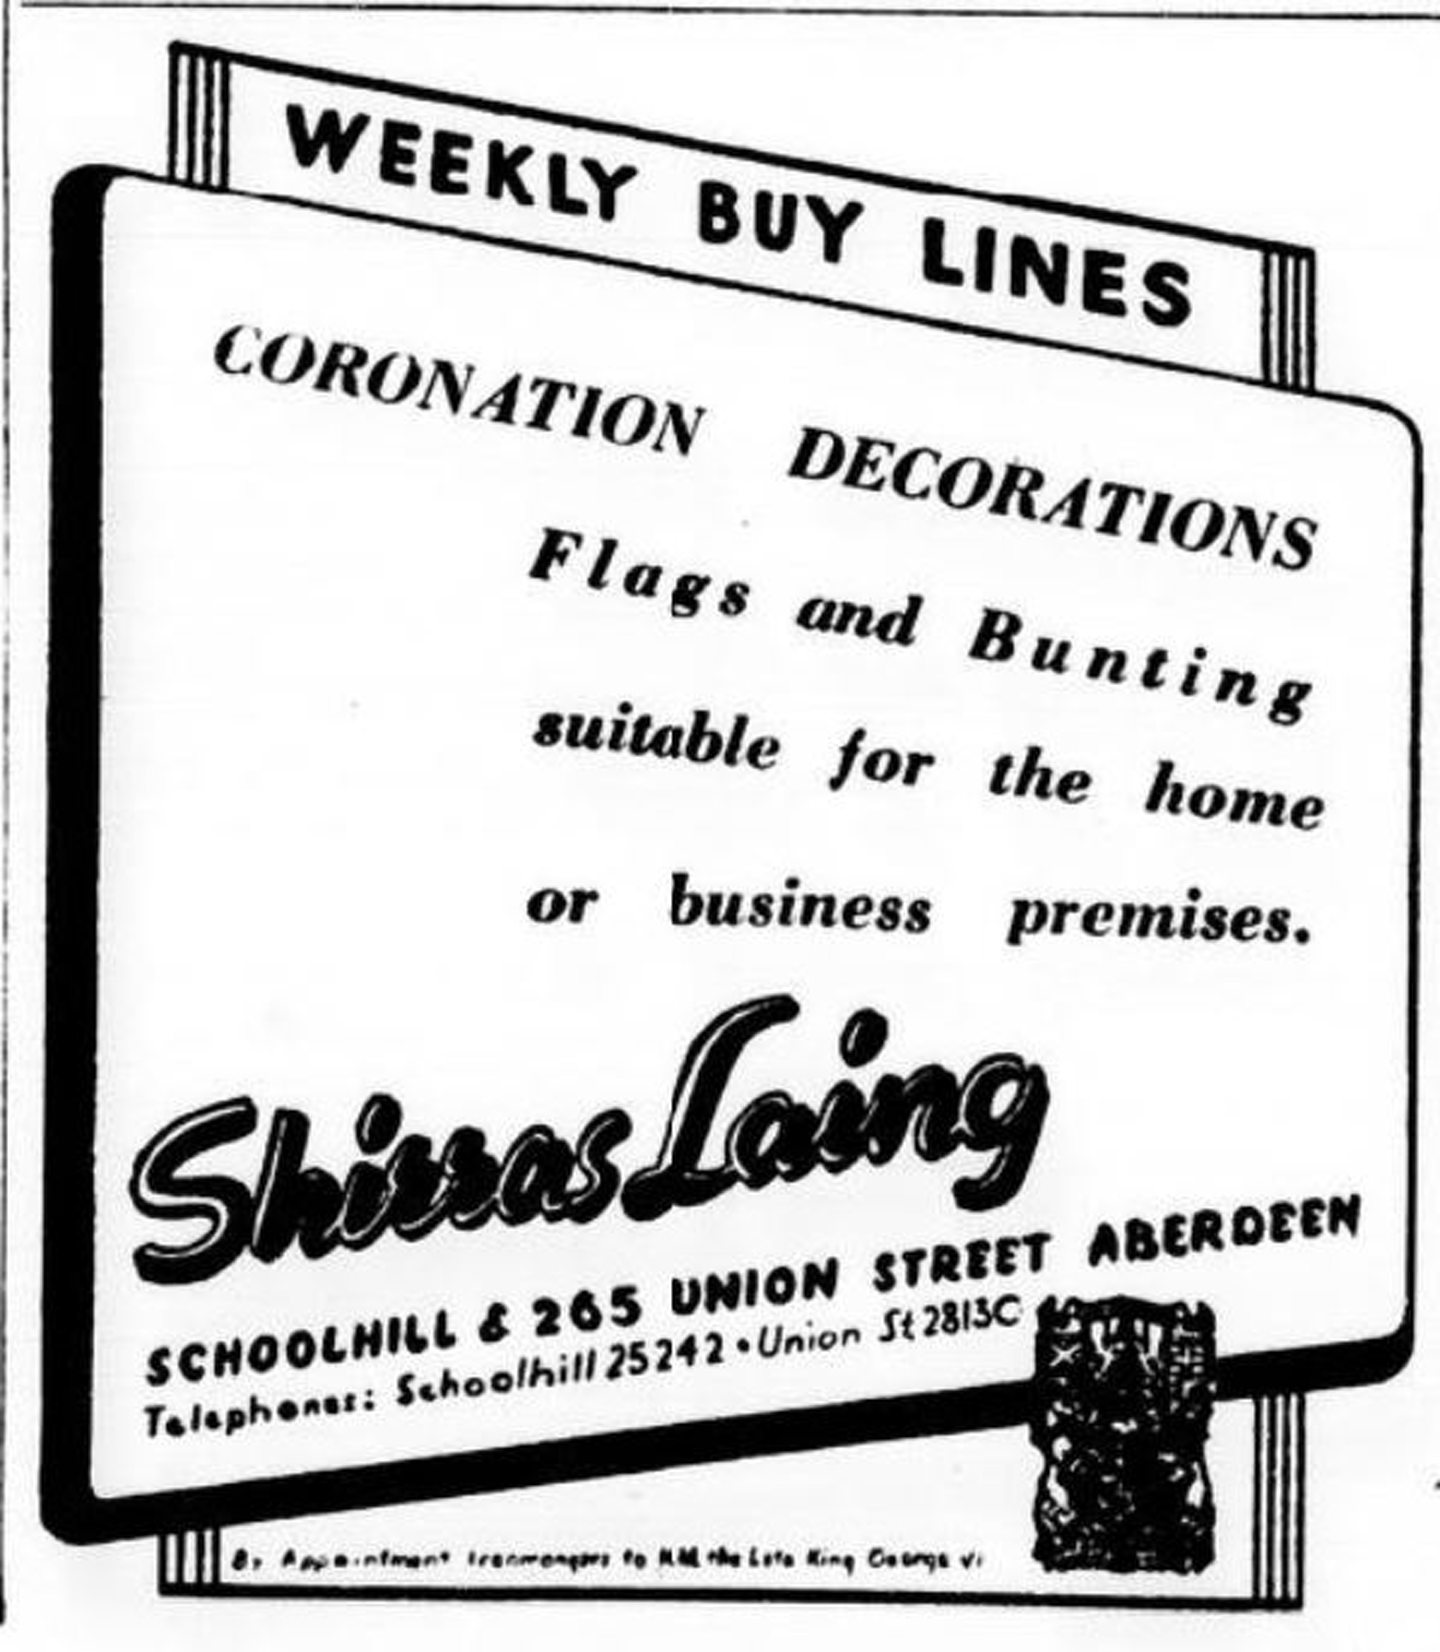 A Shirras Laing ad from 1953 which reads: 'Coronation Decorations. Flags and bunting suitable for the home or business premises.'